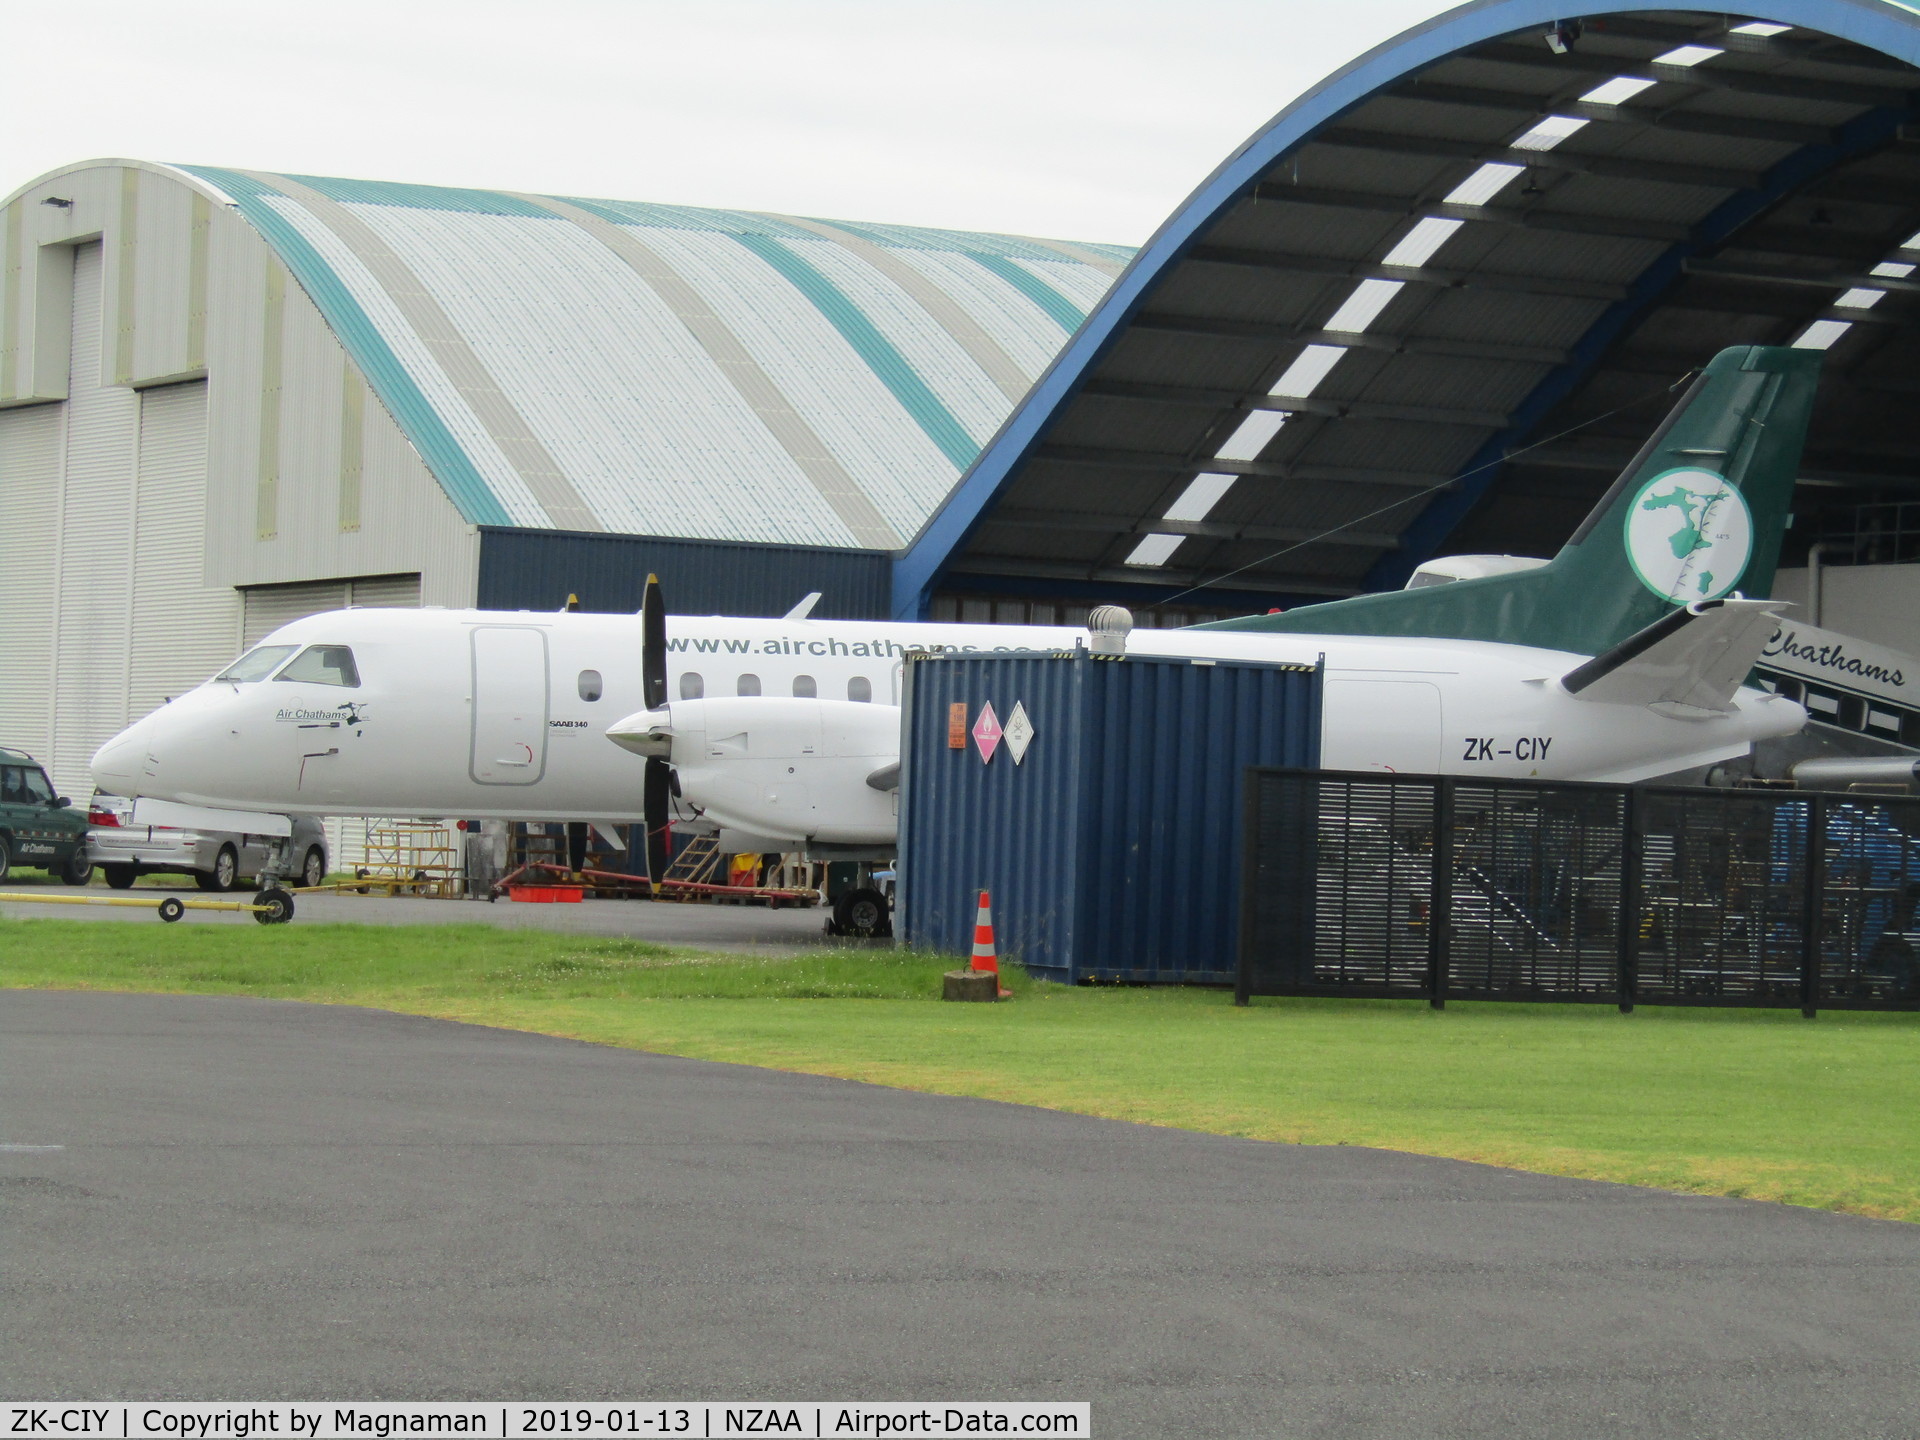 ZK-CIY, 1988 Saab 340A C/N 340A-145, just out of hangar